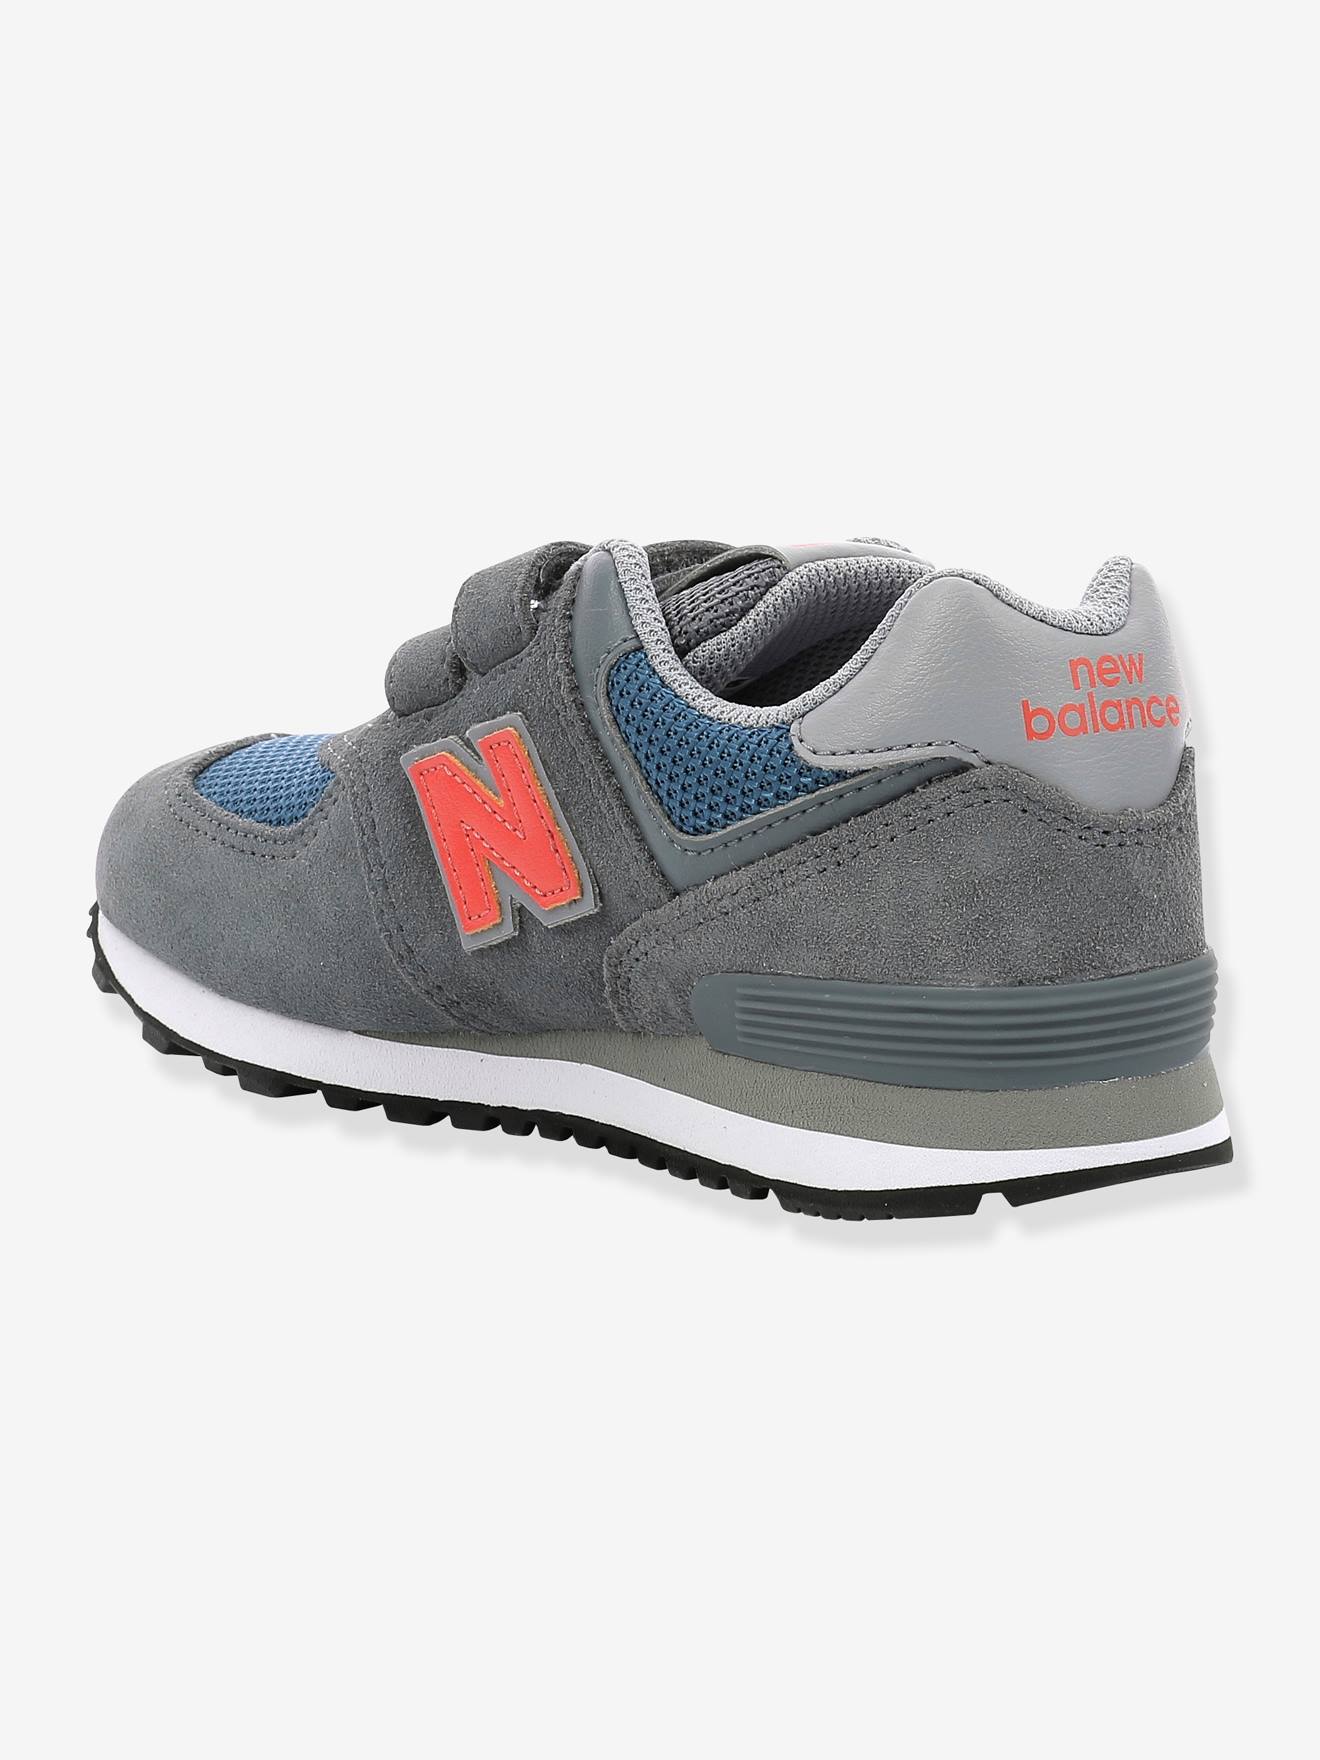 new balance 574 garconClearance & Wholesale Promotional Products ...